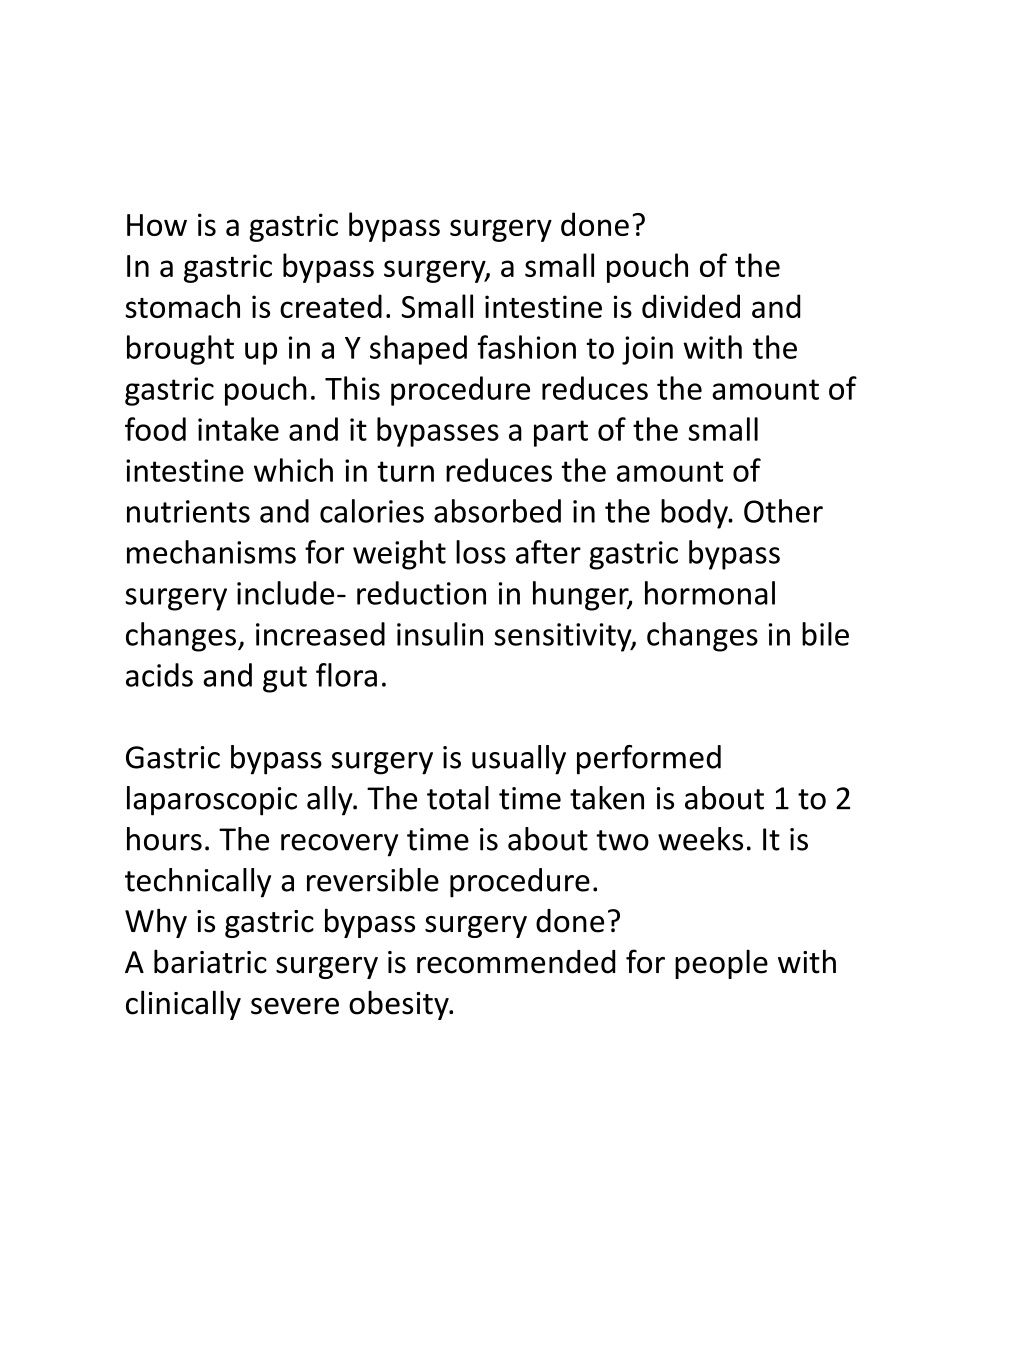 Ppt Gastric Bypass Surgery And Its Procedure Powerpoint Presentation Id11488051 2400